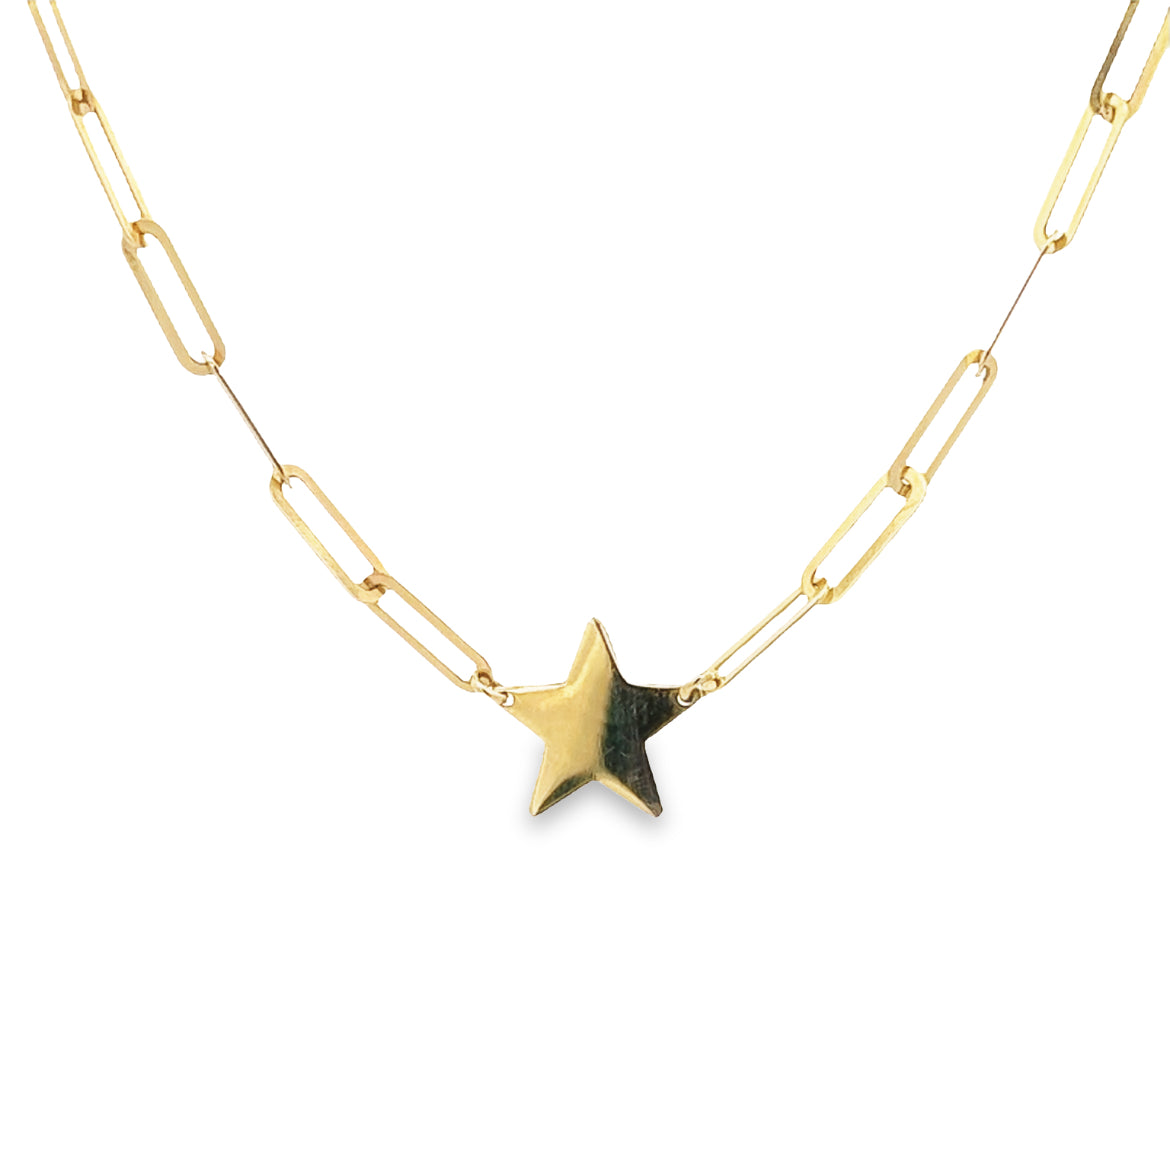 14K GOLD LINK CHAIN WITH STAR CHARM